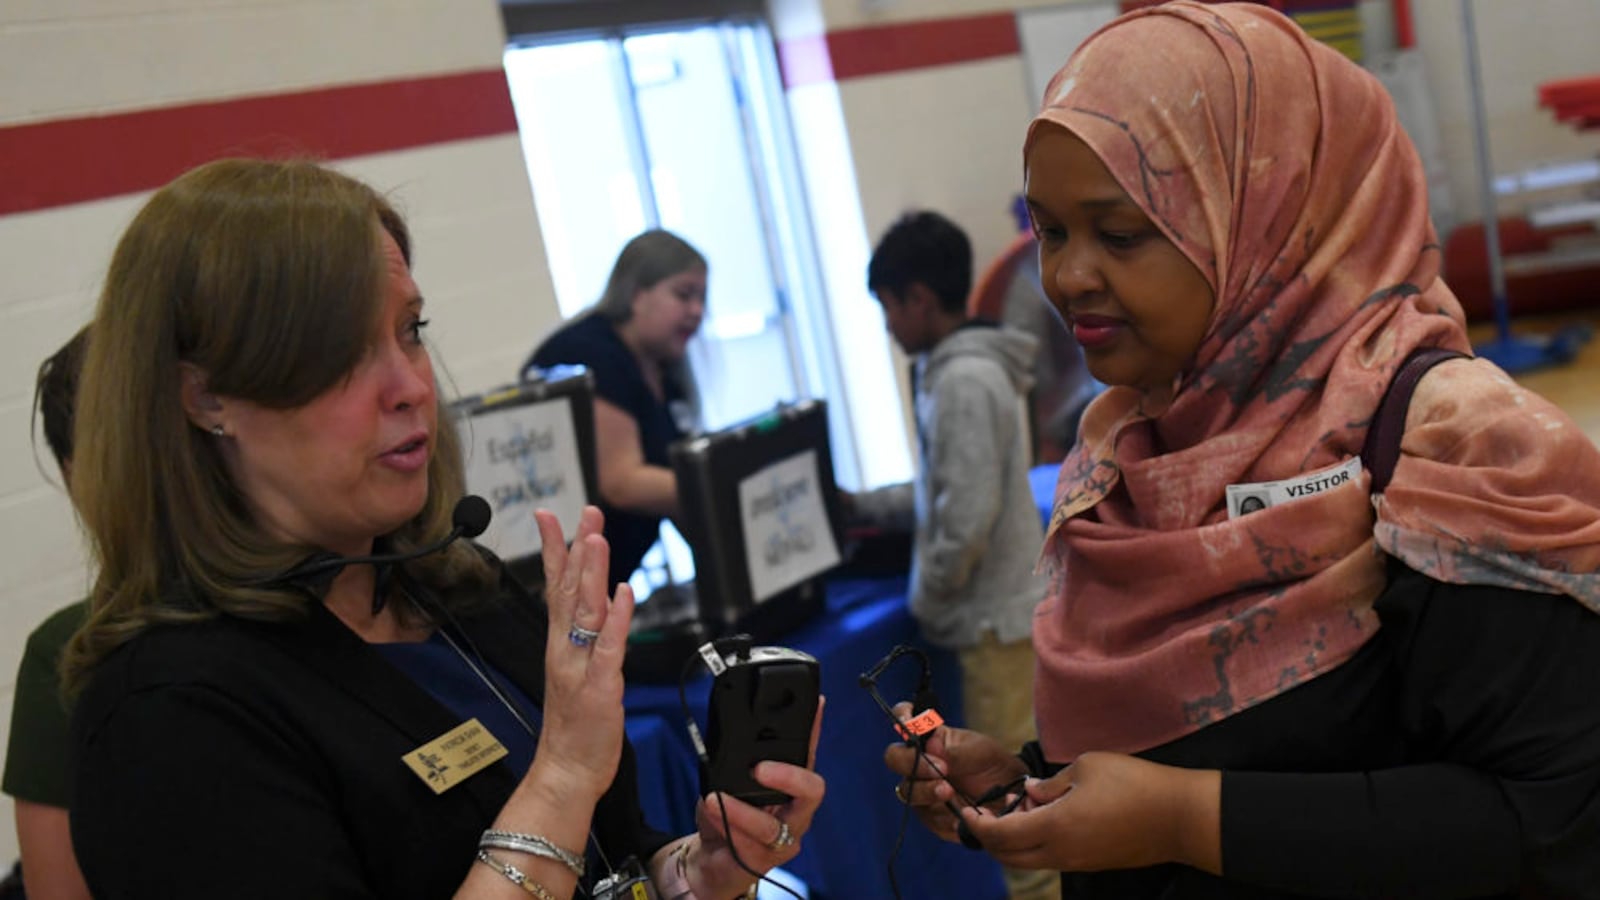 Patricia Shaw, an interpreter for Aurora Public Schools, left, shows Indonesia Maye how to use the transmitters during a back-to-school event at Aurora West College Preparatory Academy on August 6. Maye was hired by the district to interpret to Somali students and their families at the event. (Photo by RJ Sangosti/The Denver Post)